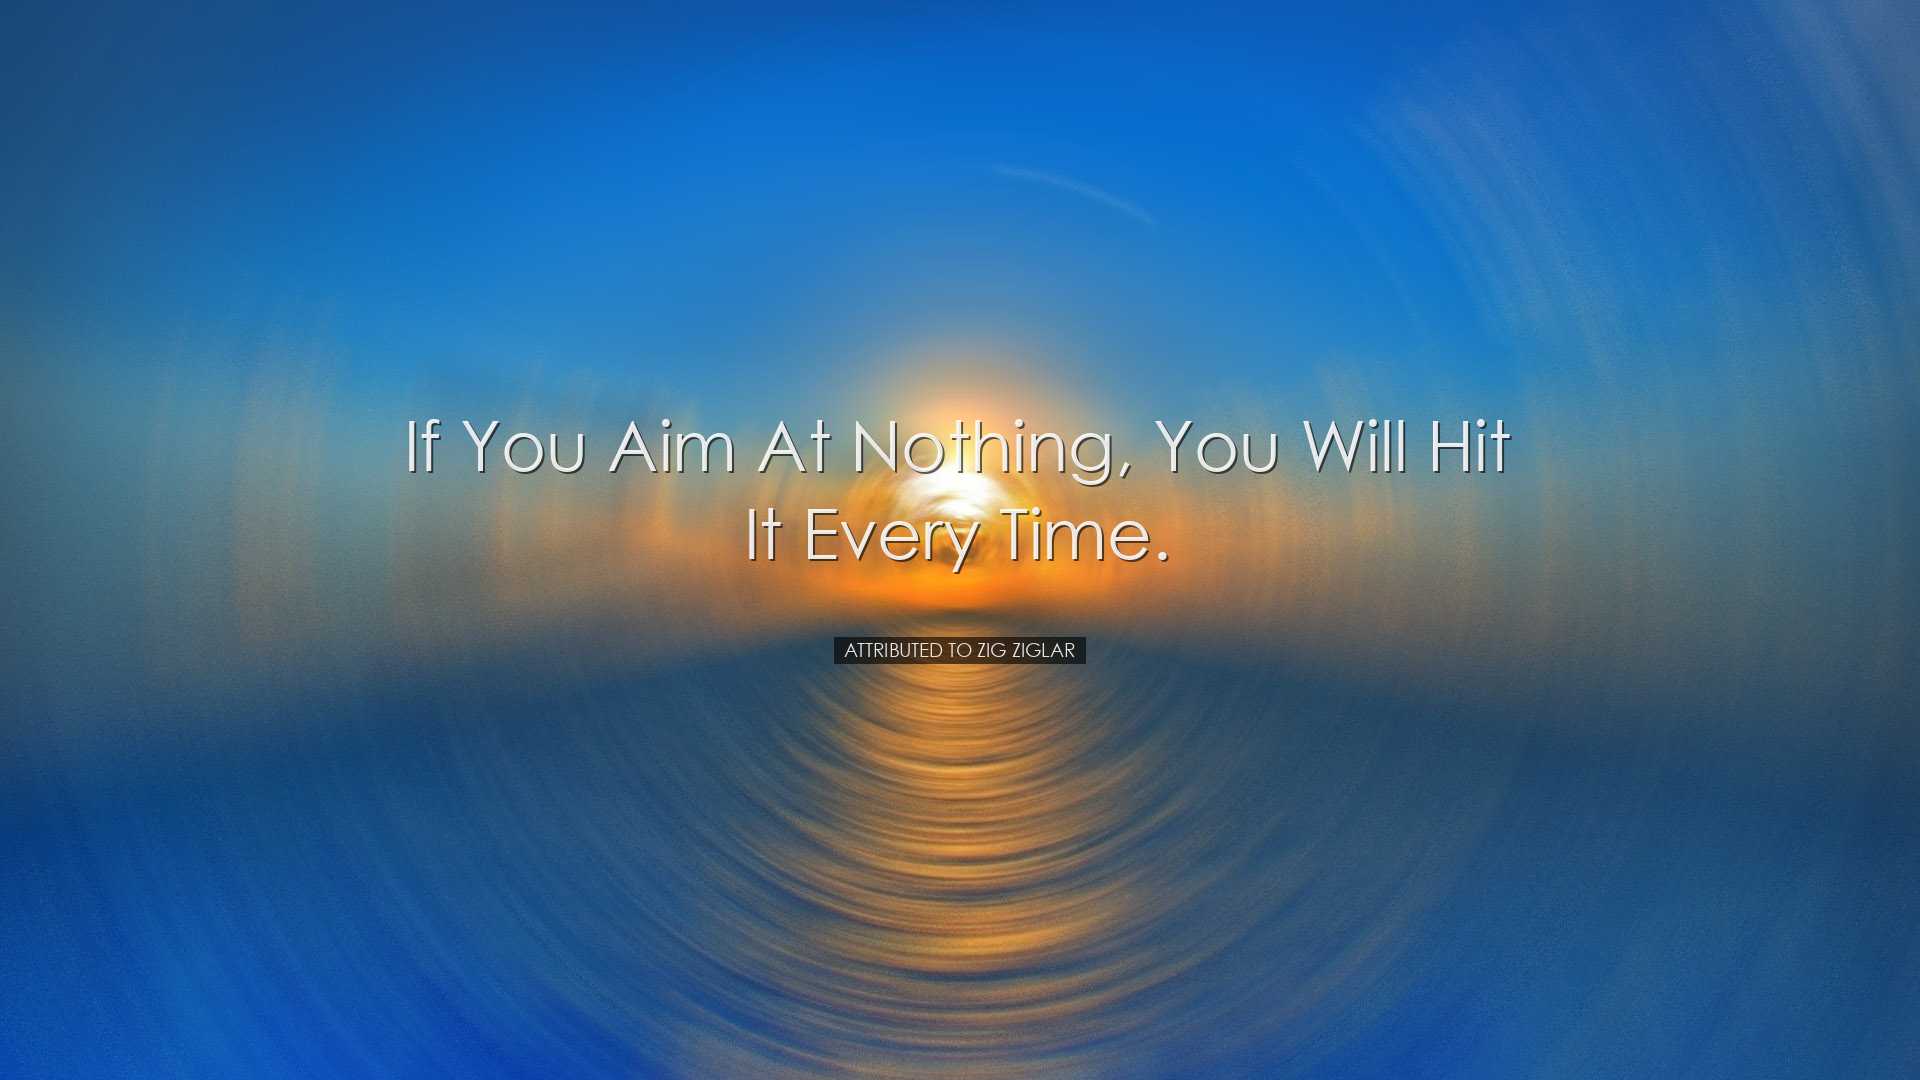 If you aim at nothing, you will hit it every time. - Attributed to